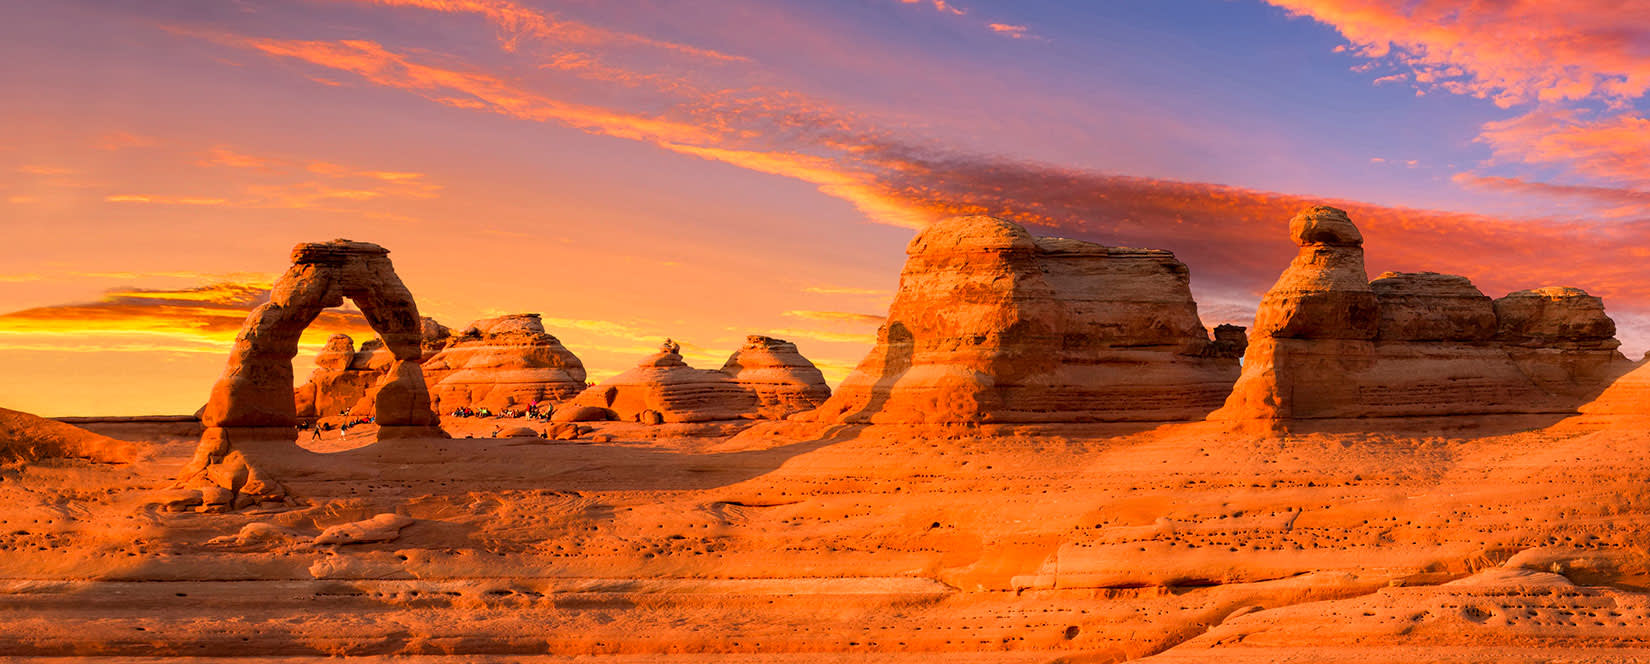 Top 10 Things to Do in Moab